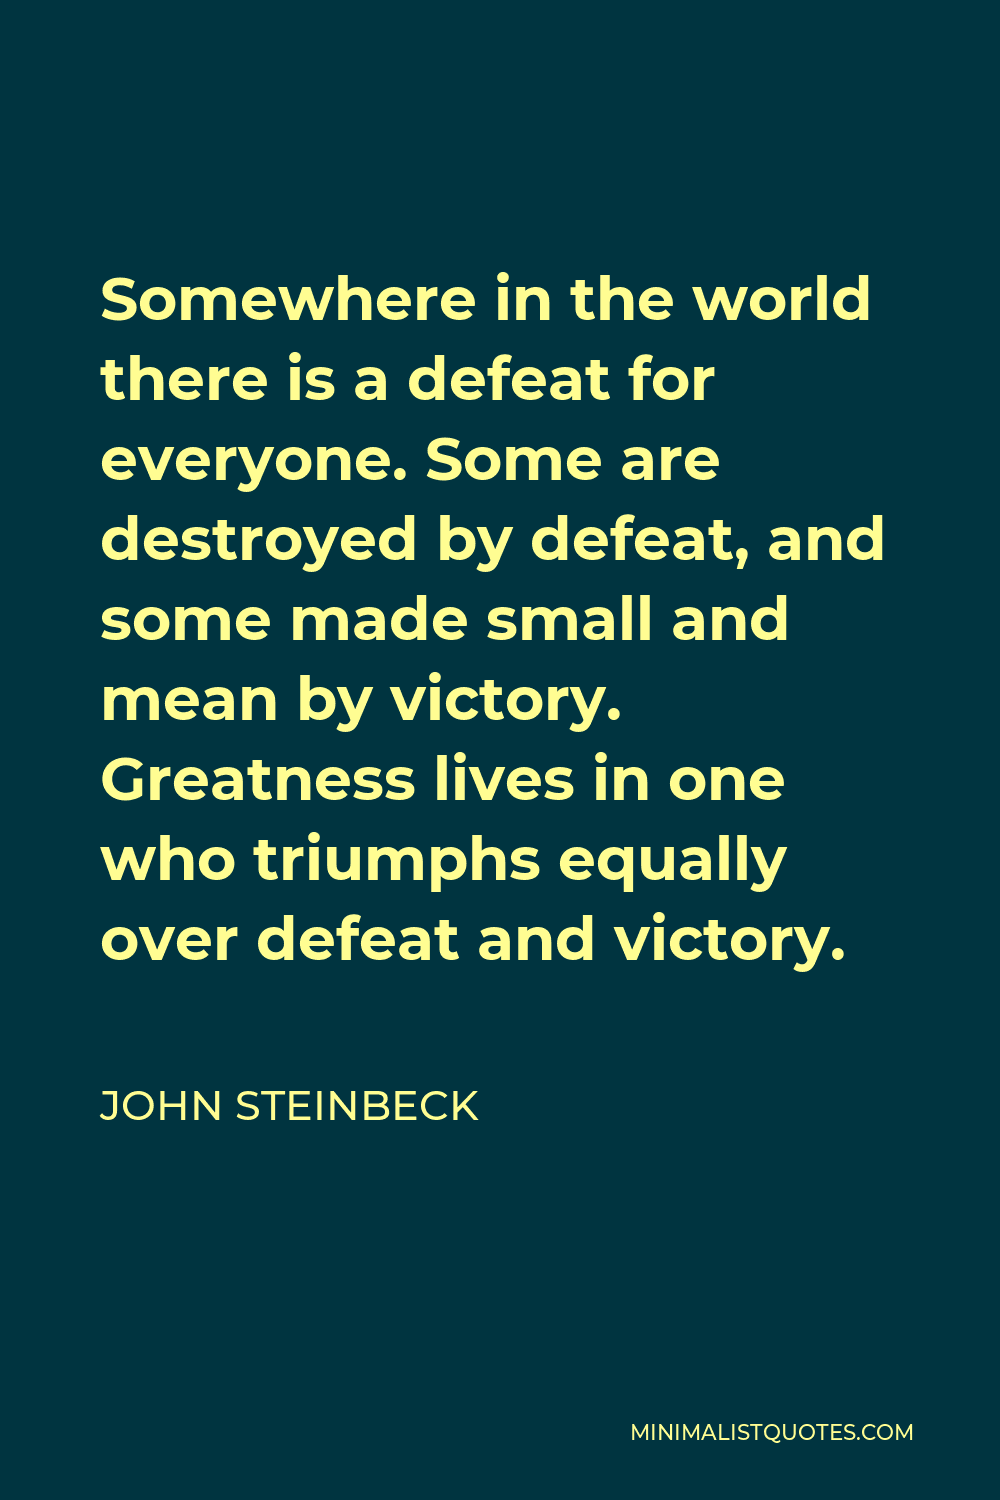 John Steinbeck Quote - Somewhere in the world there is a defeat for everyone. Some are destroyed by defeat, and some made small and mean by victory. Greatness lives in one who triumphs equally over defeat and victory.